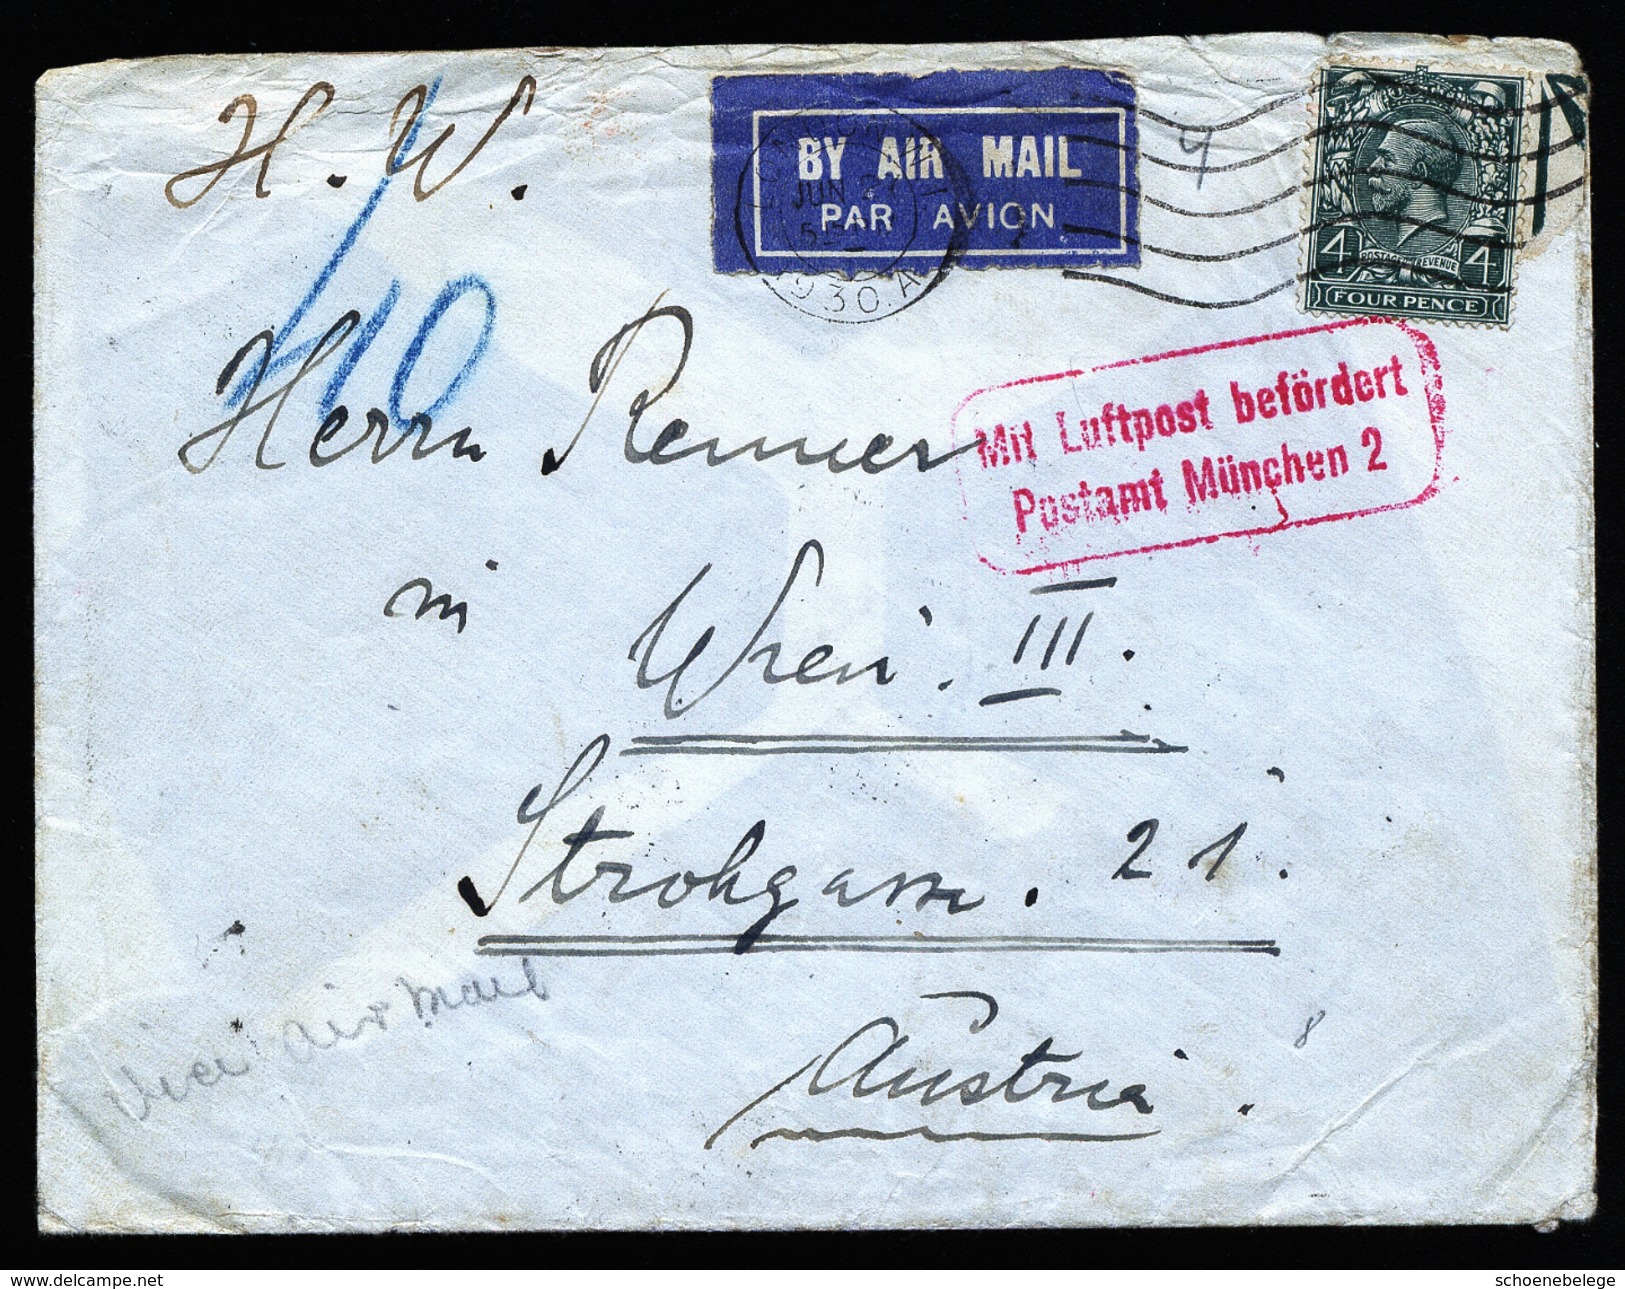 A4627) UK Airmail Cover From London 06/21/30 To Wien Over München - Covers & Documents